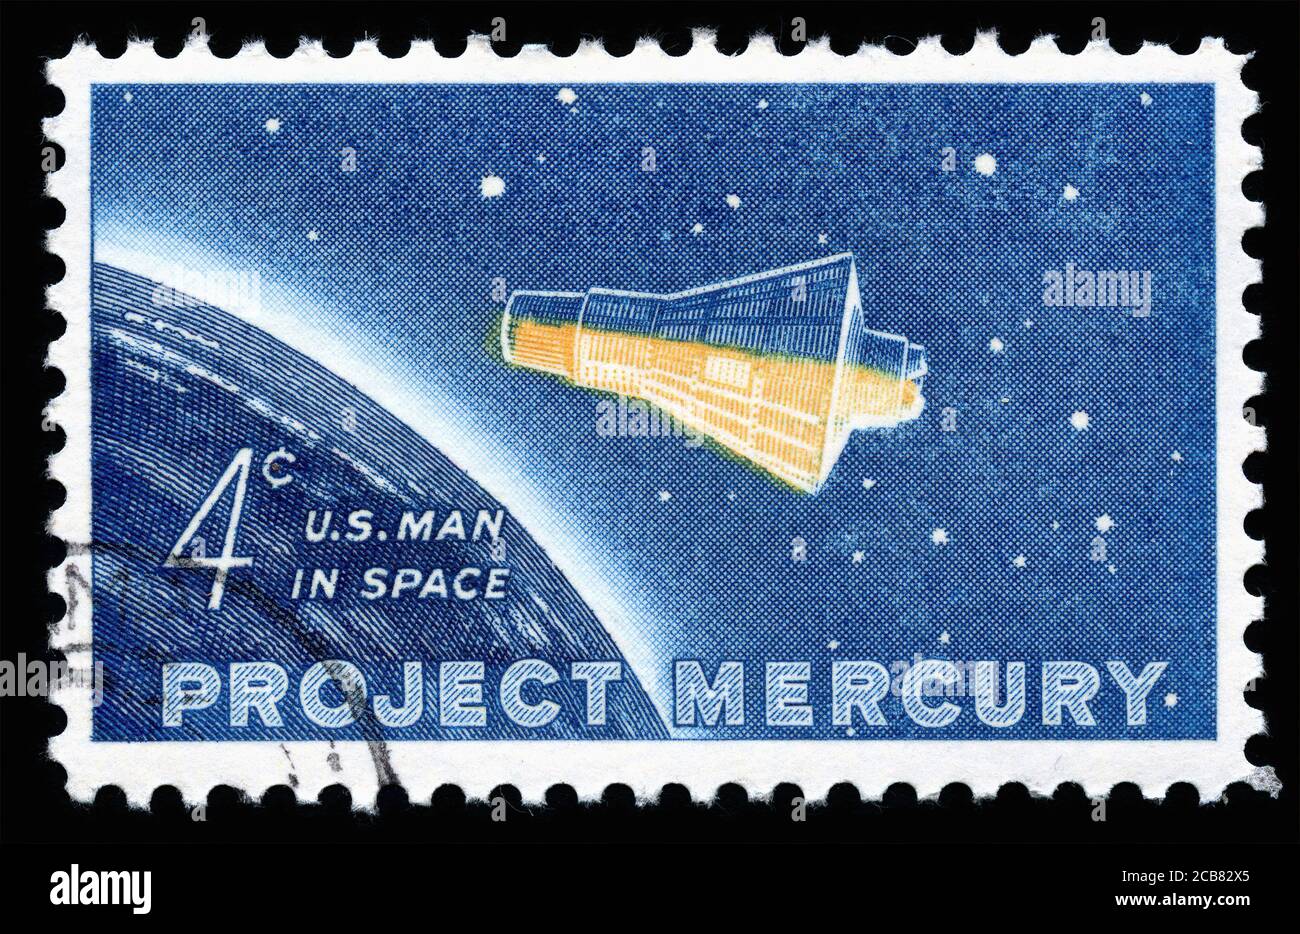 London, UK, February 19 2018 - Vintage 1962 USA 4 cents cancelled postage stamp showing  Project Mercury space flight stamp collecting stock photo Stock Photo